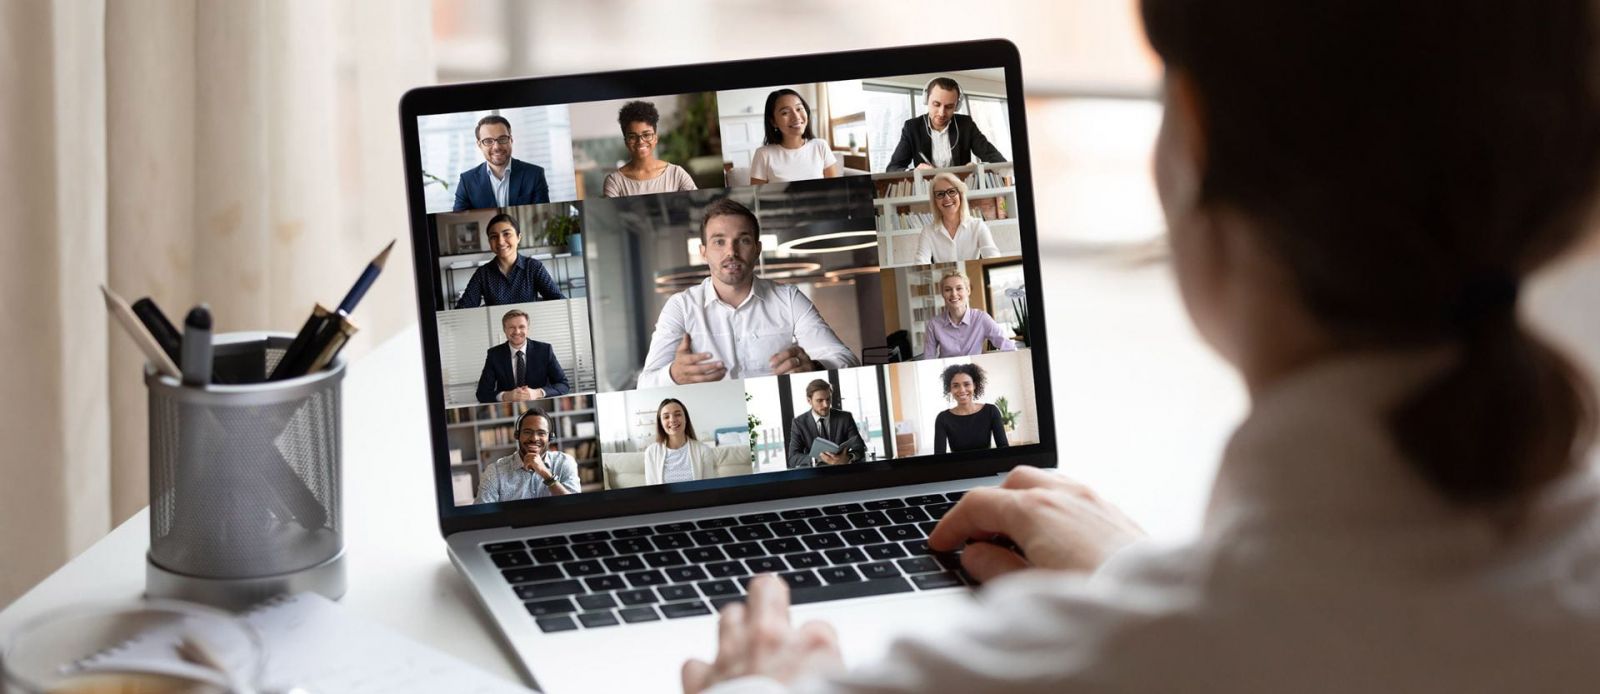 Six Ways to Run The Most Effective Virtual Meetings